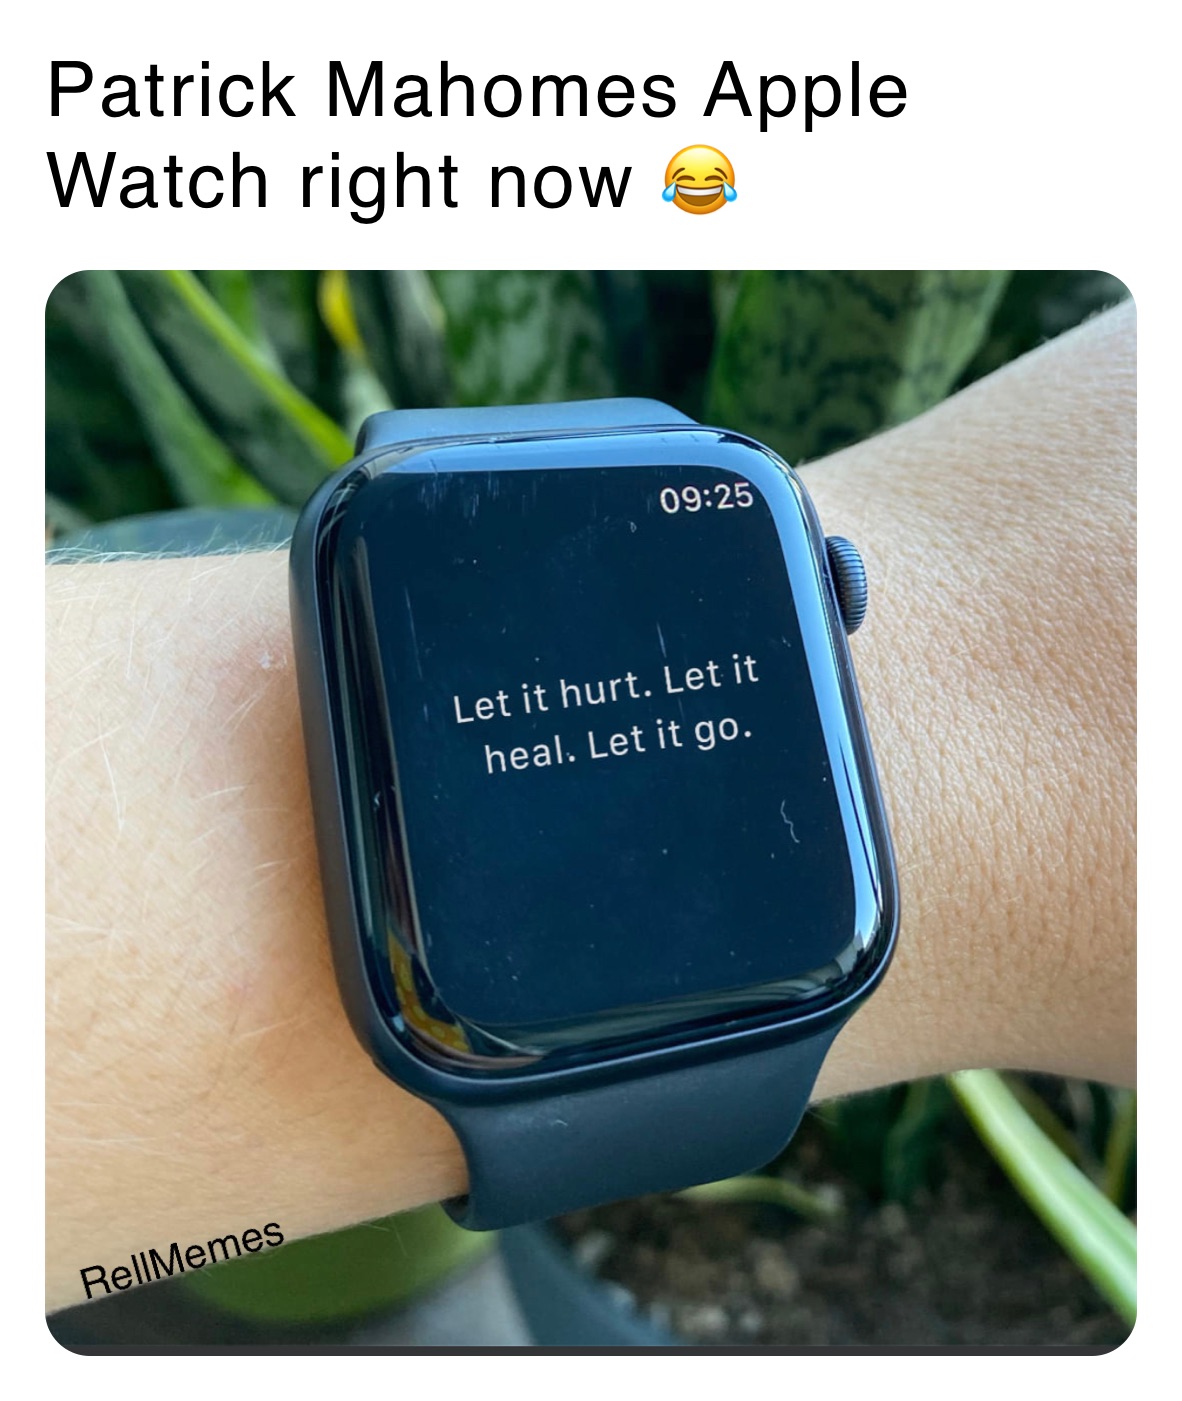 Patrick Mahomes Apple Watch right now 😂 